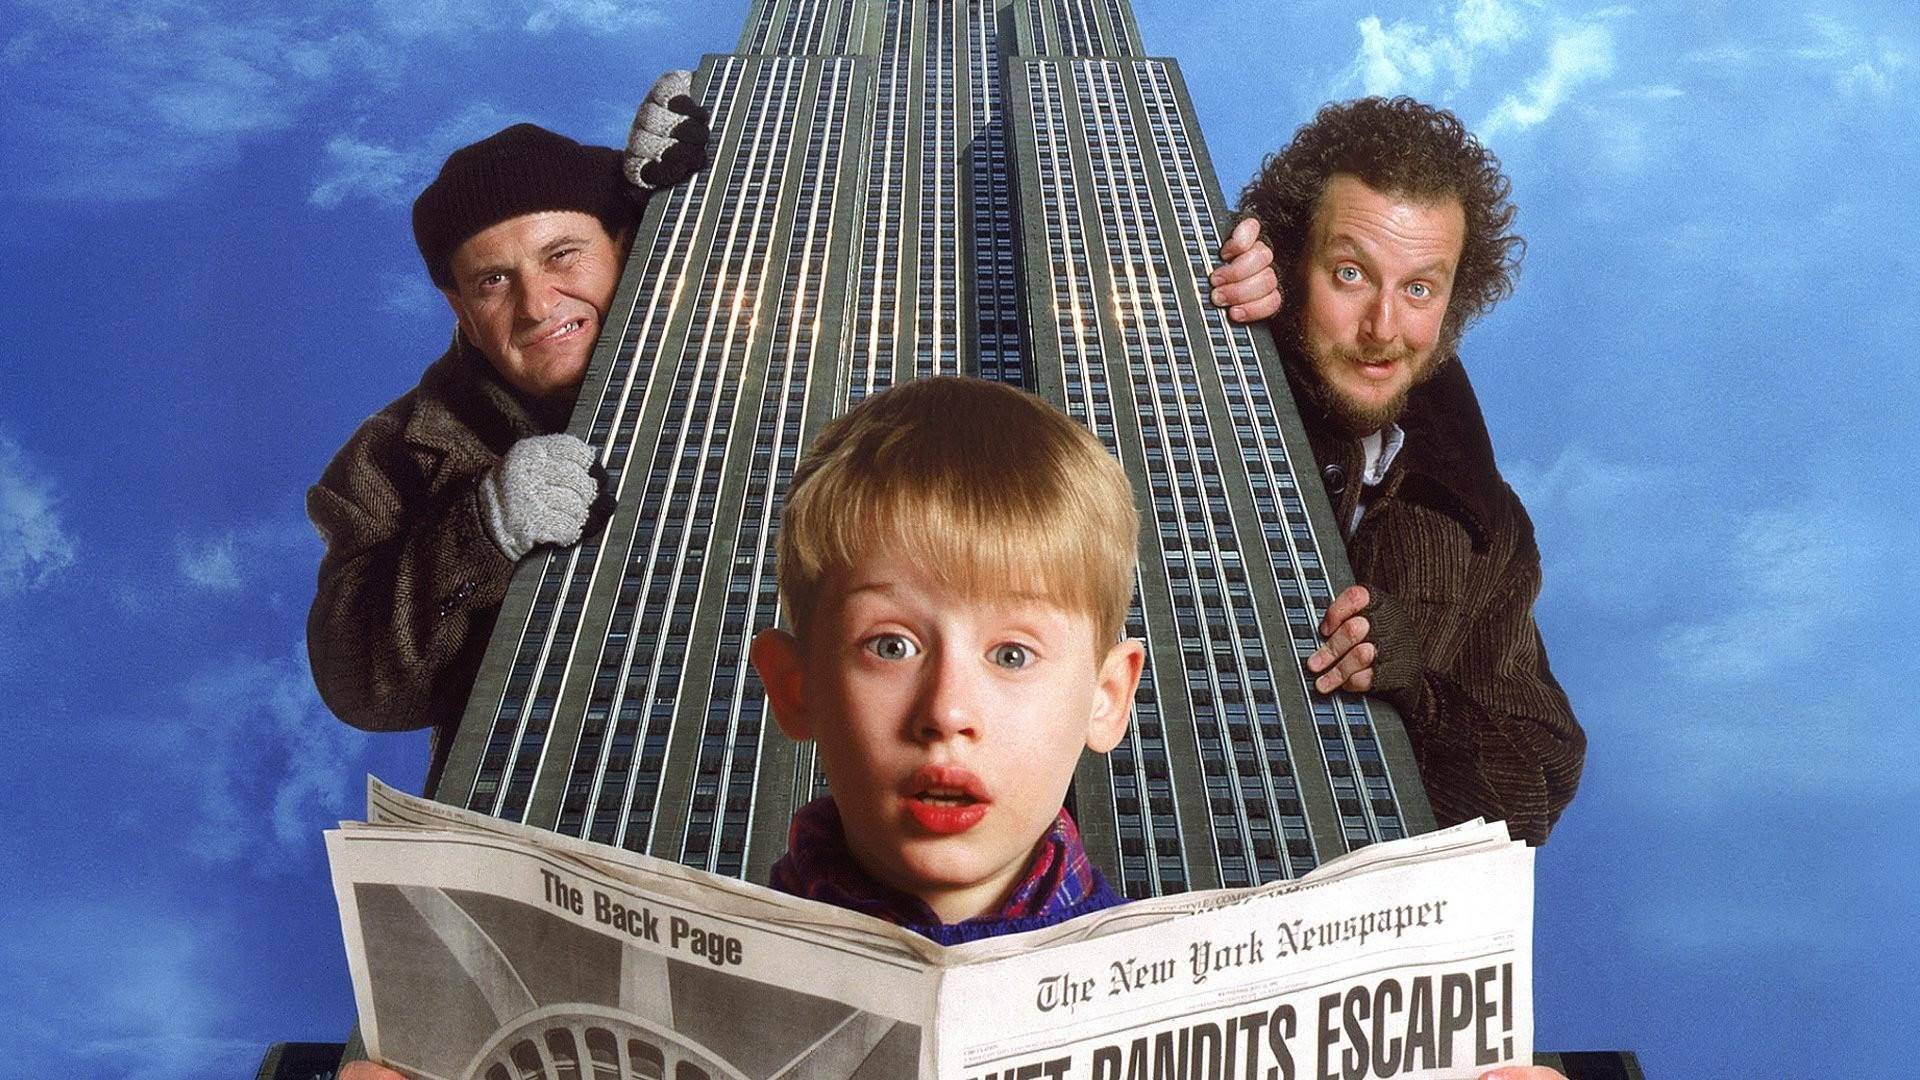 Home Alone 2: Lost in New York / Home Alone 2: Lost in New York (1992)